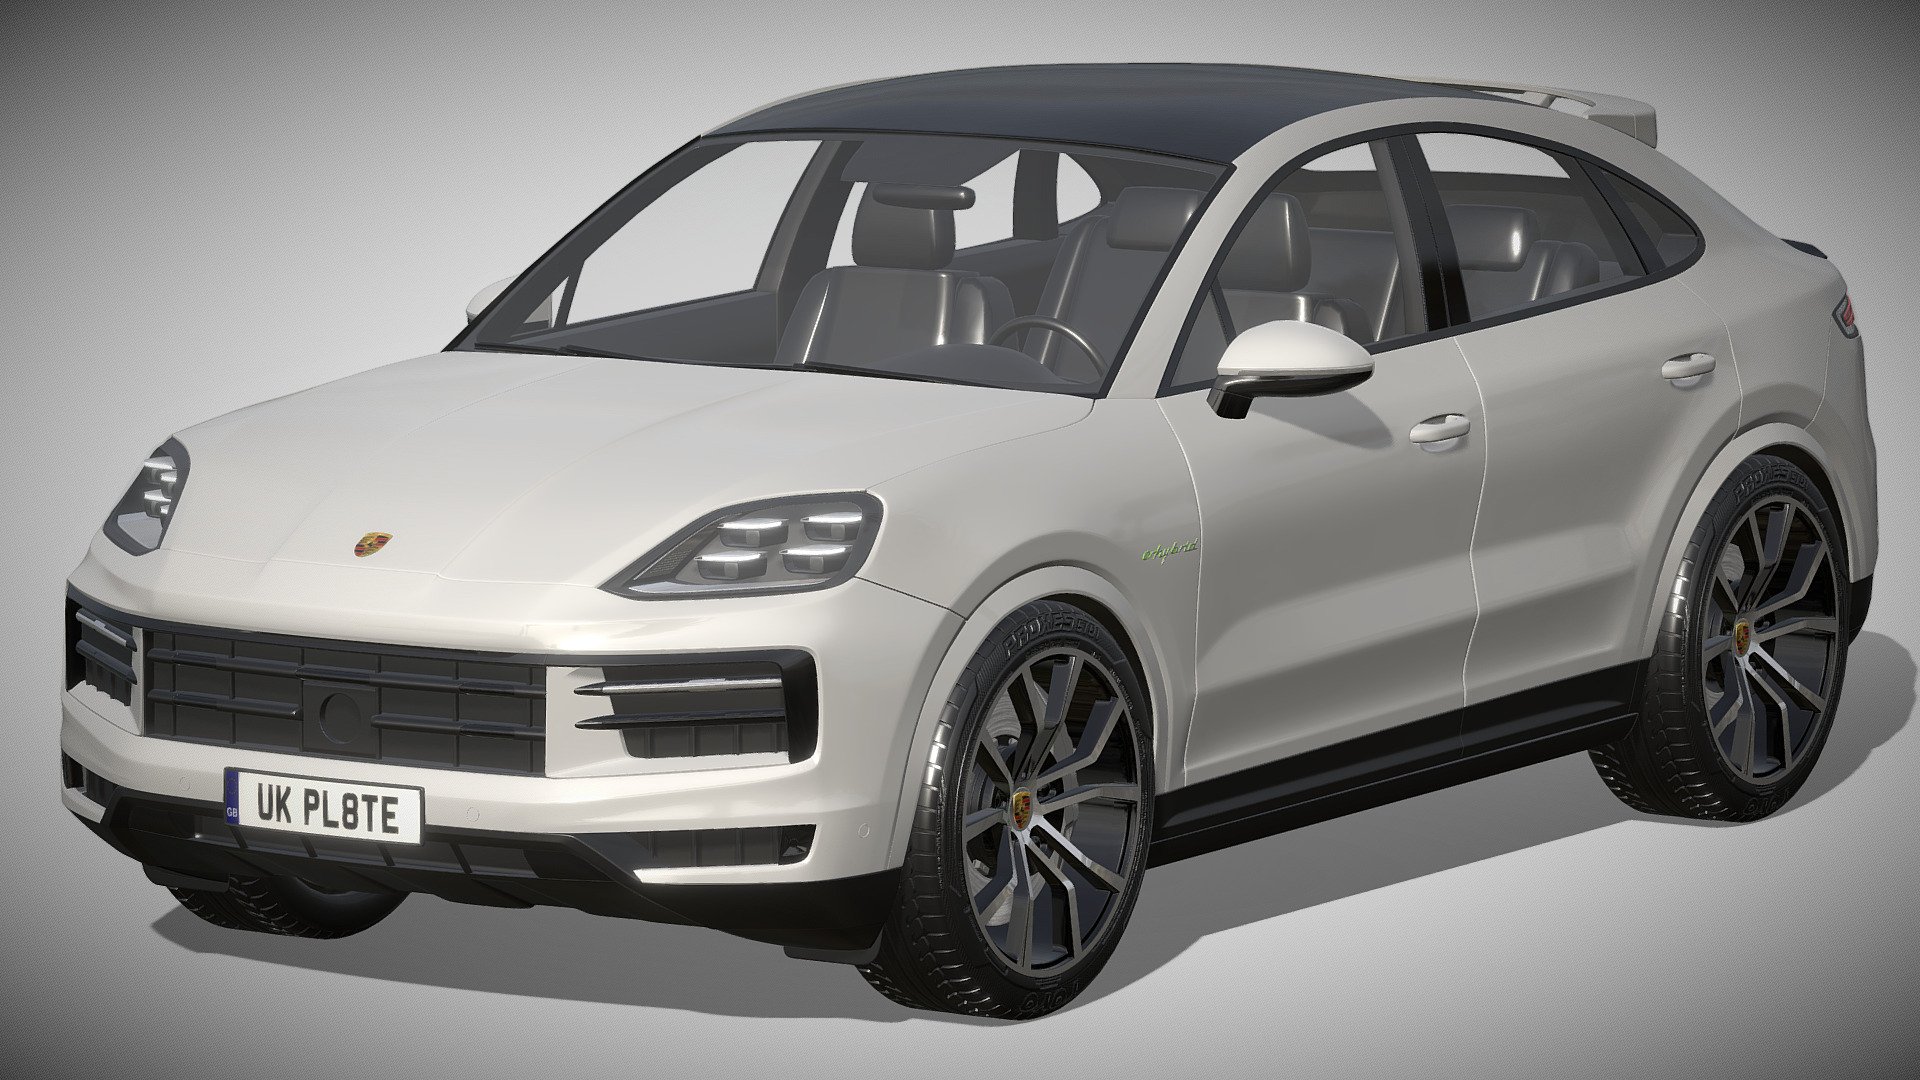 Porsche Cayenne E-Hybrid Coupe 2024

https://www.porsche.com/usa/models/cayenne/cayenne-coupe-models/cayenne-coupe-e-hybrid/

Clean geometry Light weight model, yet completely detailed for HI-Res renders. Use for movies, Advertisements or games

Corona render and materials

All textures include in *.rar files

Lighting setup is not included in the file! - Porsche Cayenne E-Hybrid Coupe 2024 - Buy Royalty Free 3D model by zifir3d 3d model